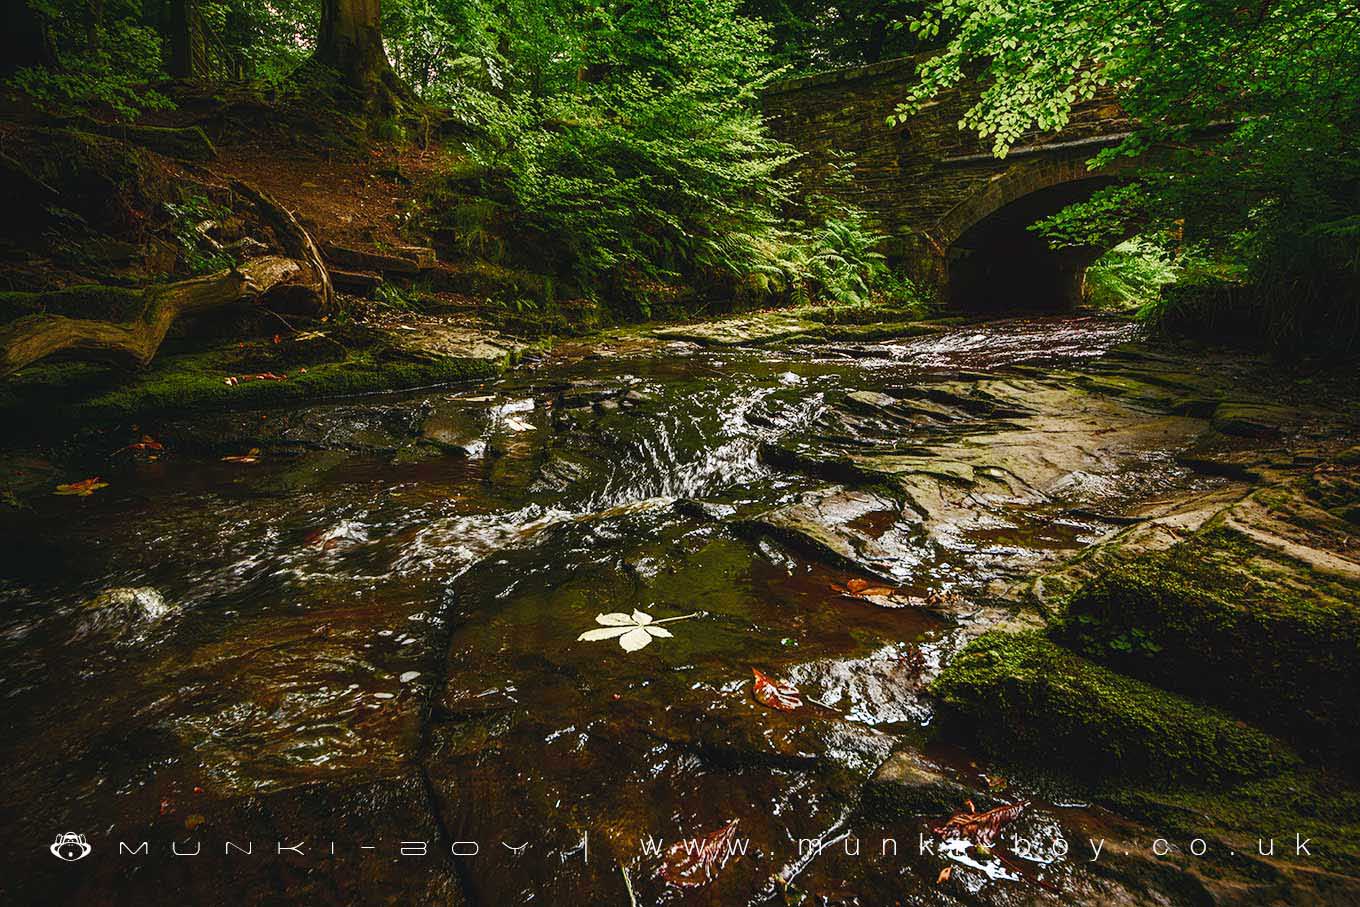 Rivers and Streams in Roddlesworth Woods